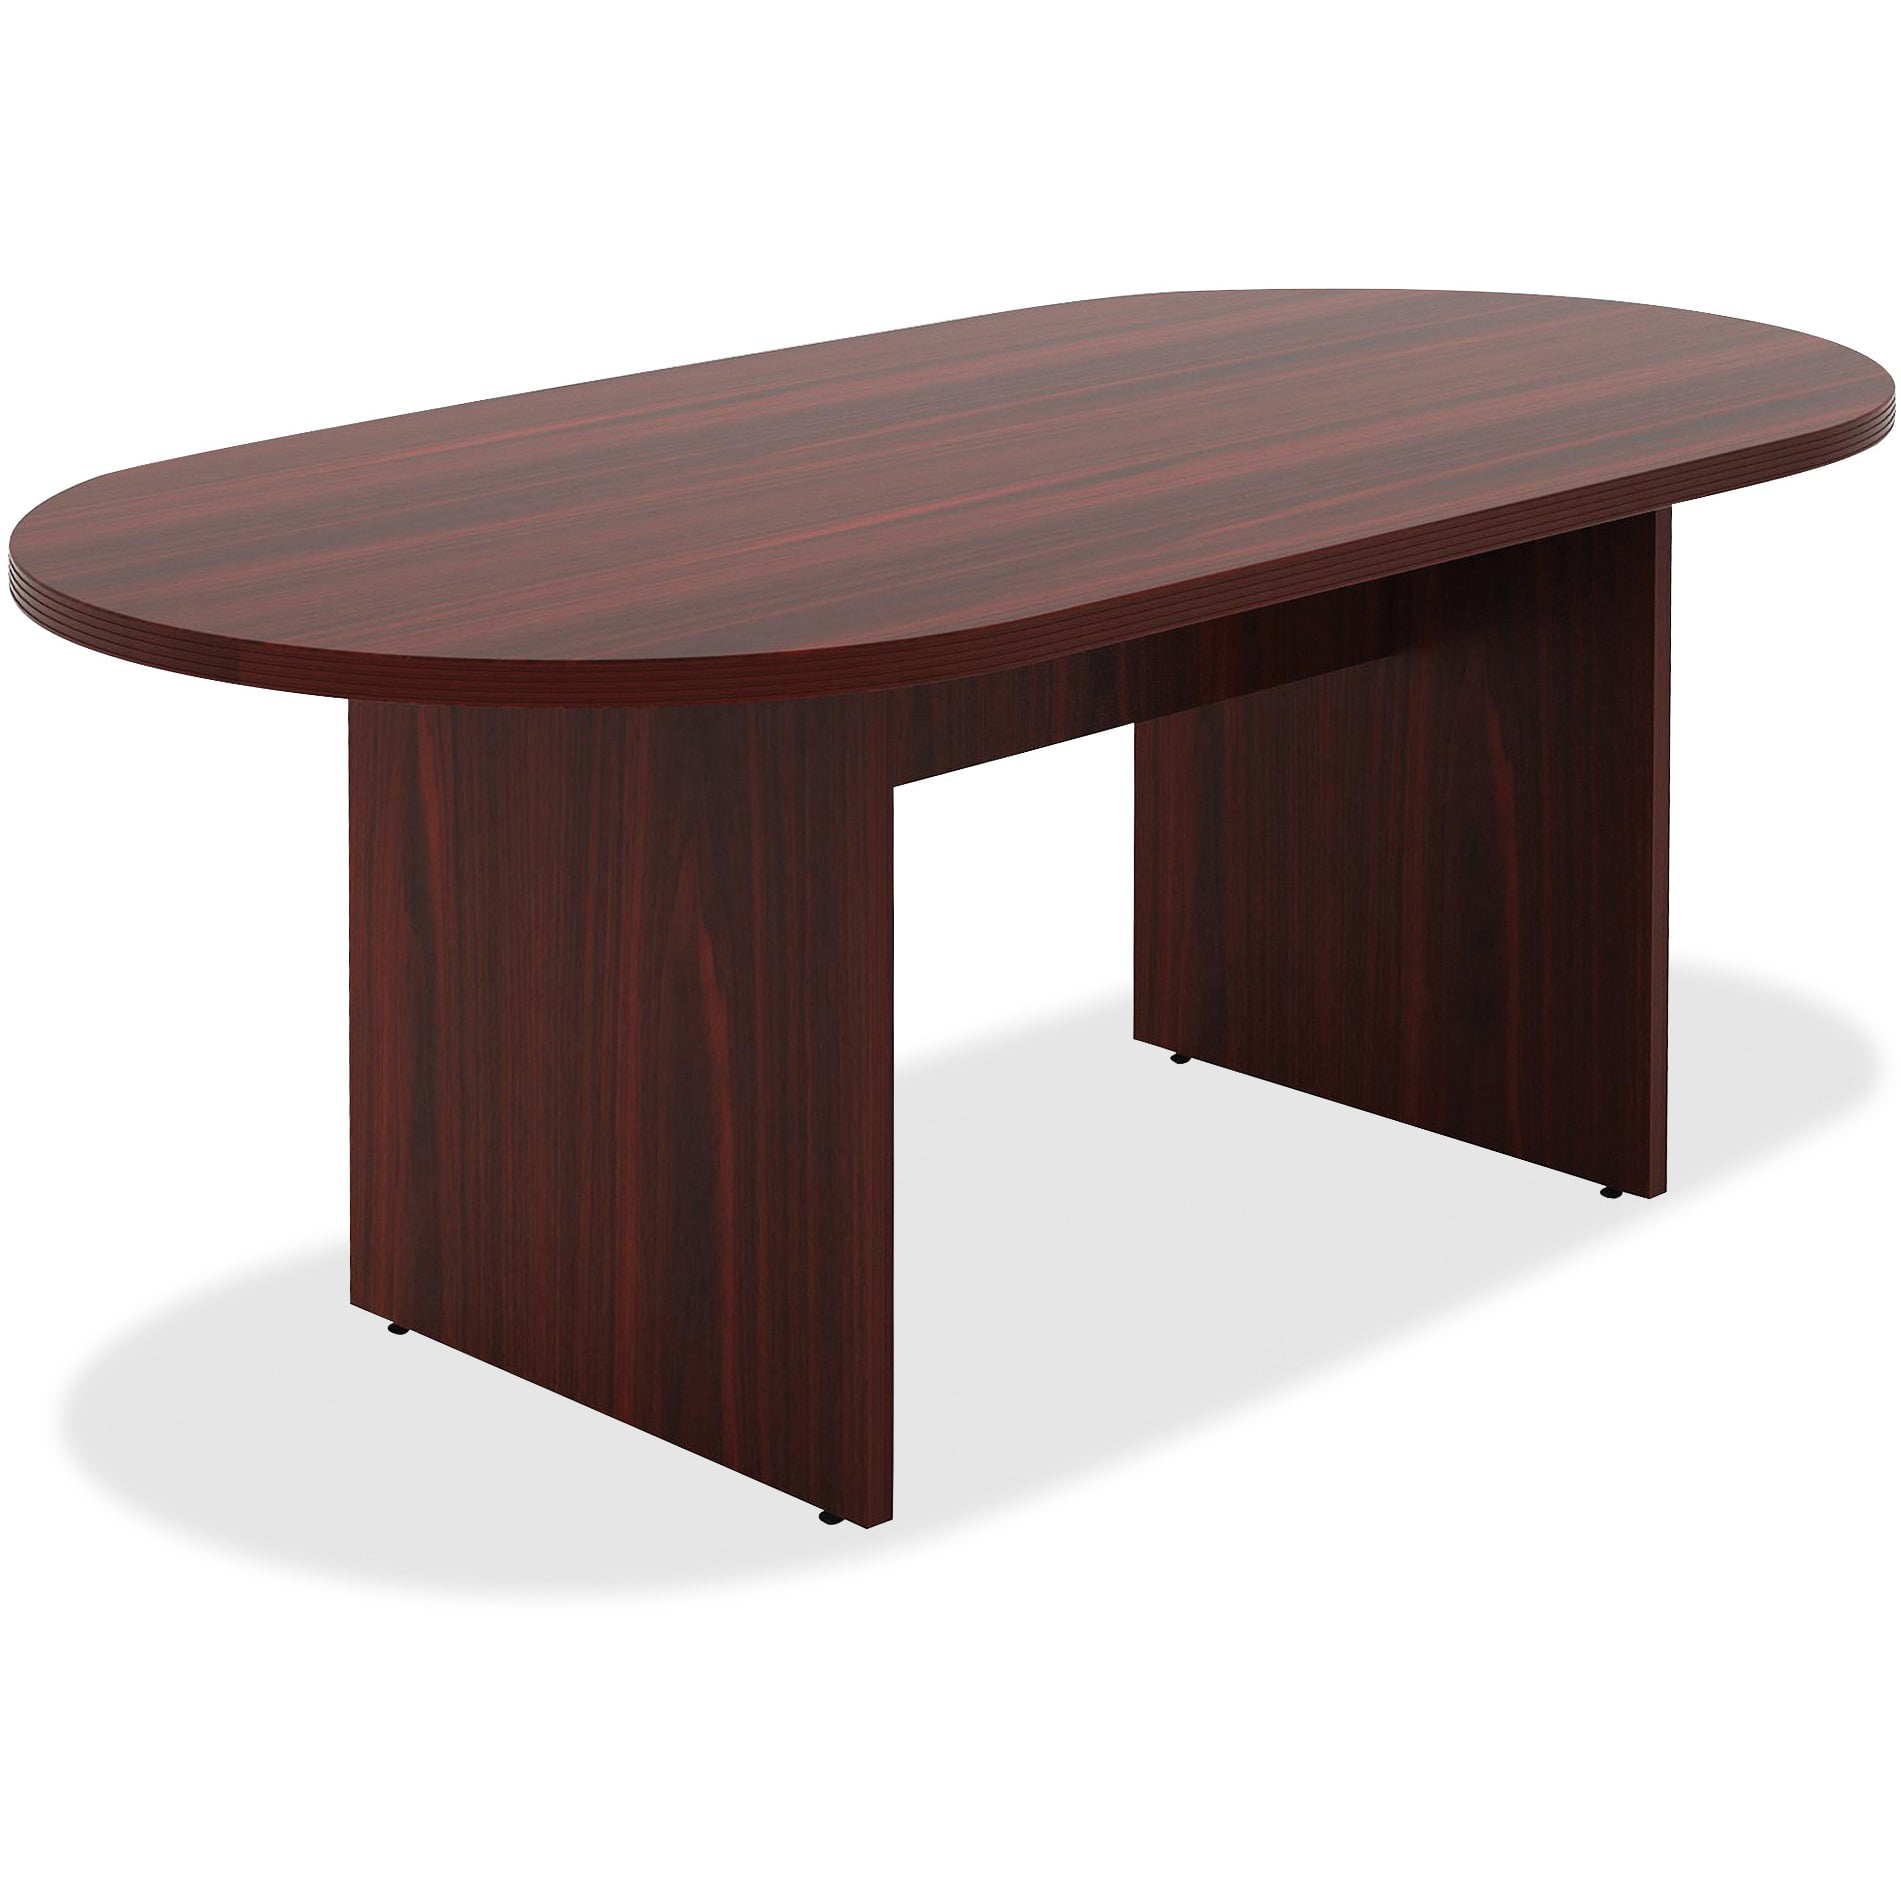 Lorell, LLR34336, Chateau Series Mahogany 6' Oval Conference Table, 1